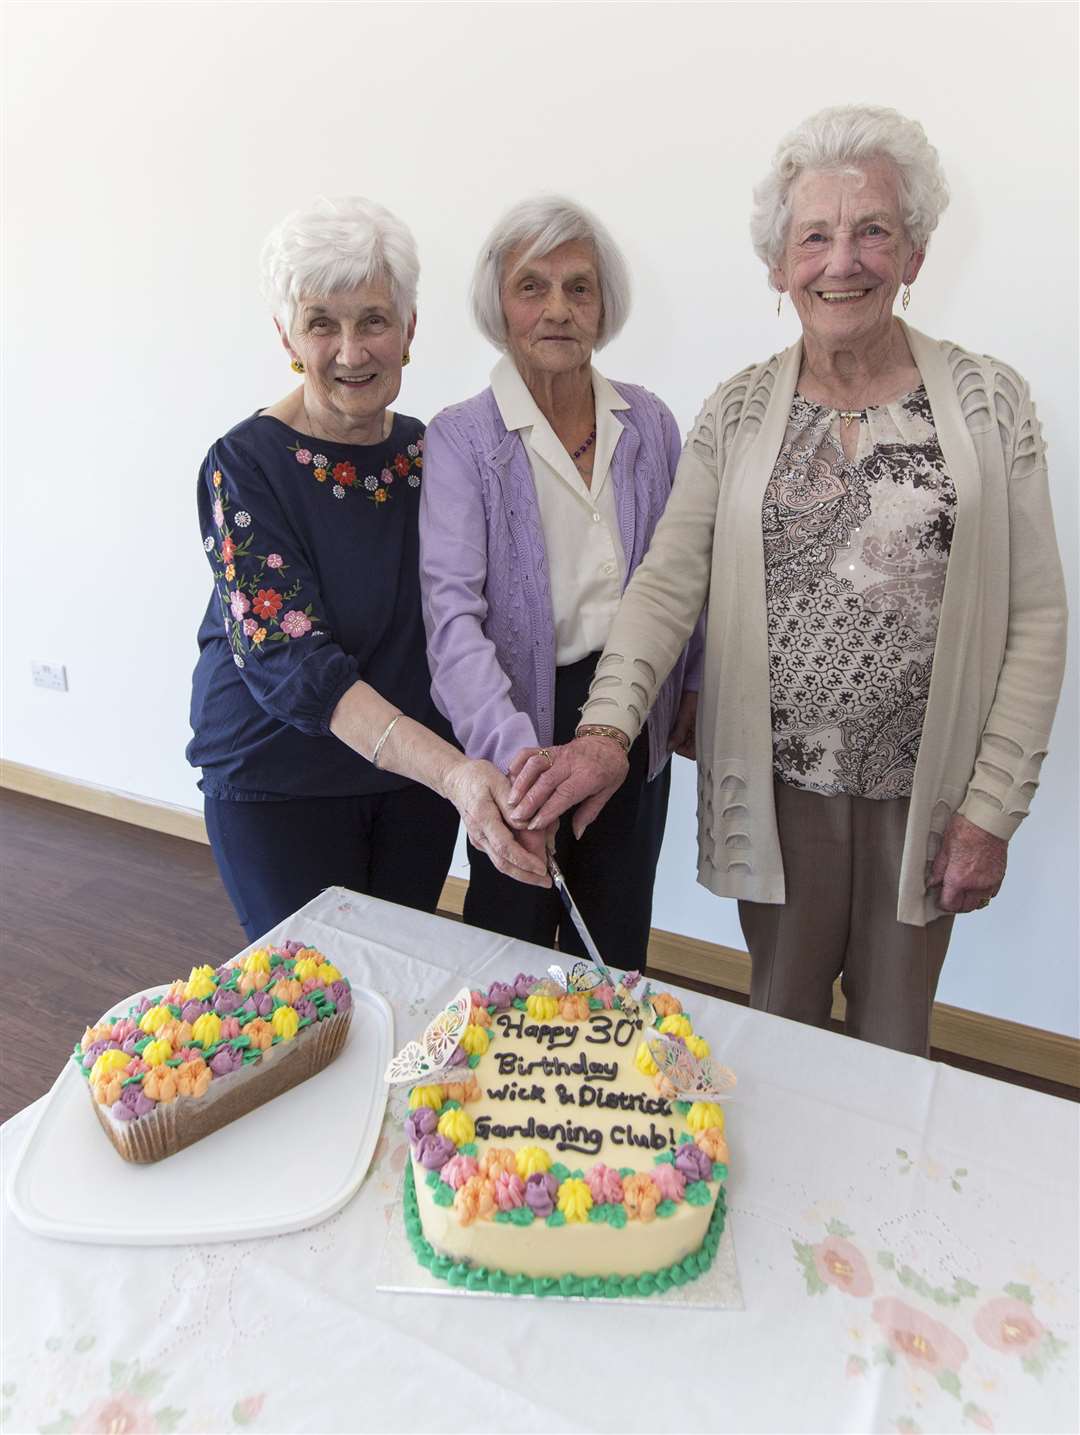 Wick and District Gardening Club's 30th anniversary cake is cut by club secretary Virginia Miller (centre) along with Betty Webster (left) and Bunty Oliphant. All three ladies were present at the club's inaugural meeting in 1993. Picture: Robert MacDonald / Northern Studios